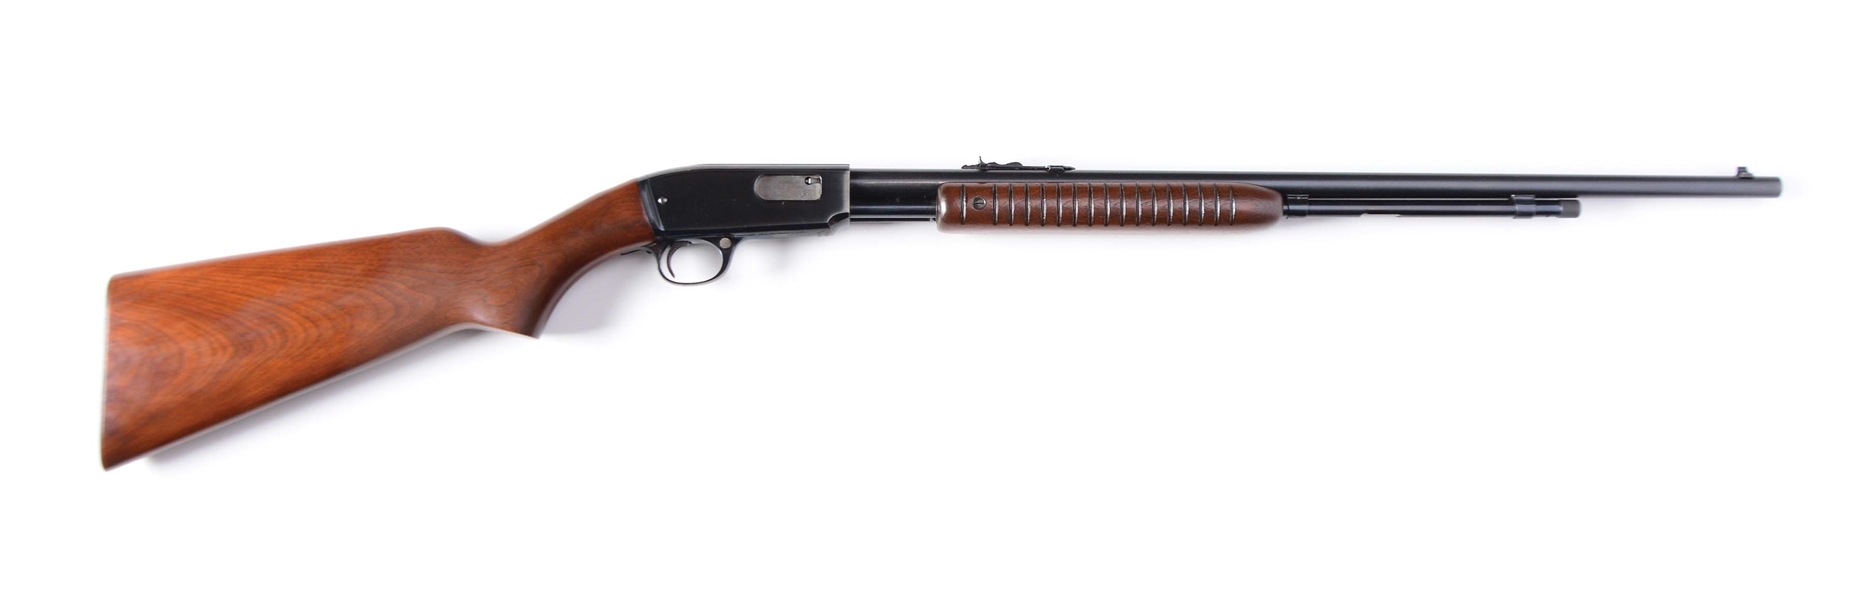 (C) BOXED WINCHESTER MODEL 61 SLIDE ACTION RIFLE (1957).